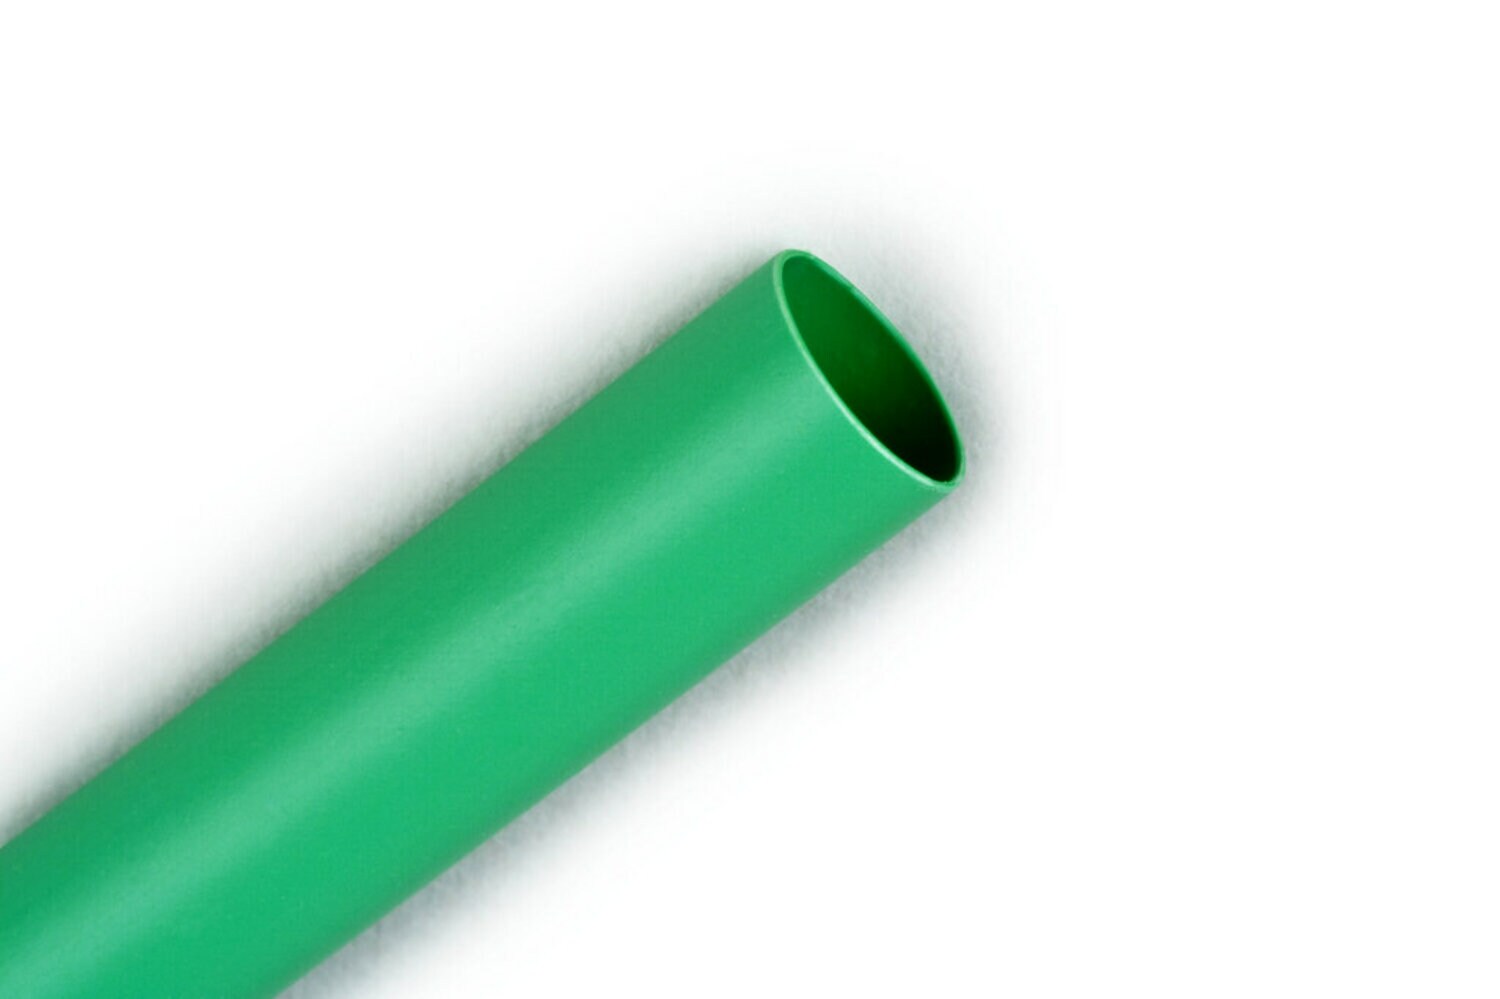 7000133624 - 3M Heat Shrink Thin-Wall Tubing FP-301-1/4-48"-Green-200 Pcs, 48 in
Length sticks, 200 pieces/case